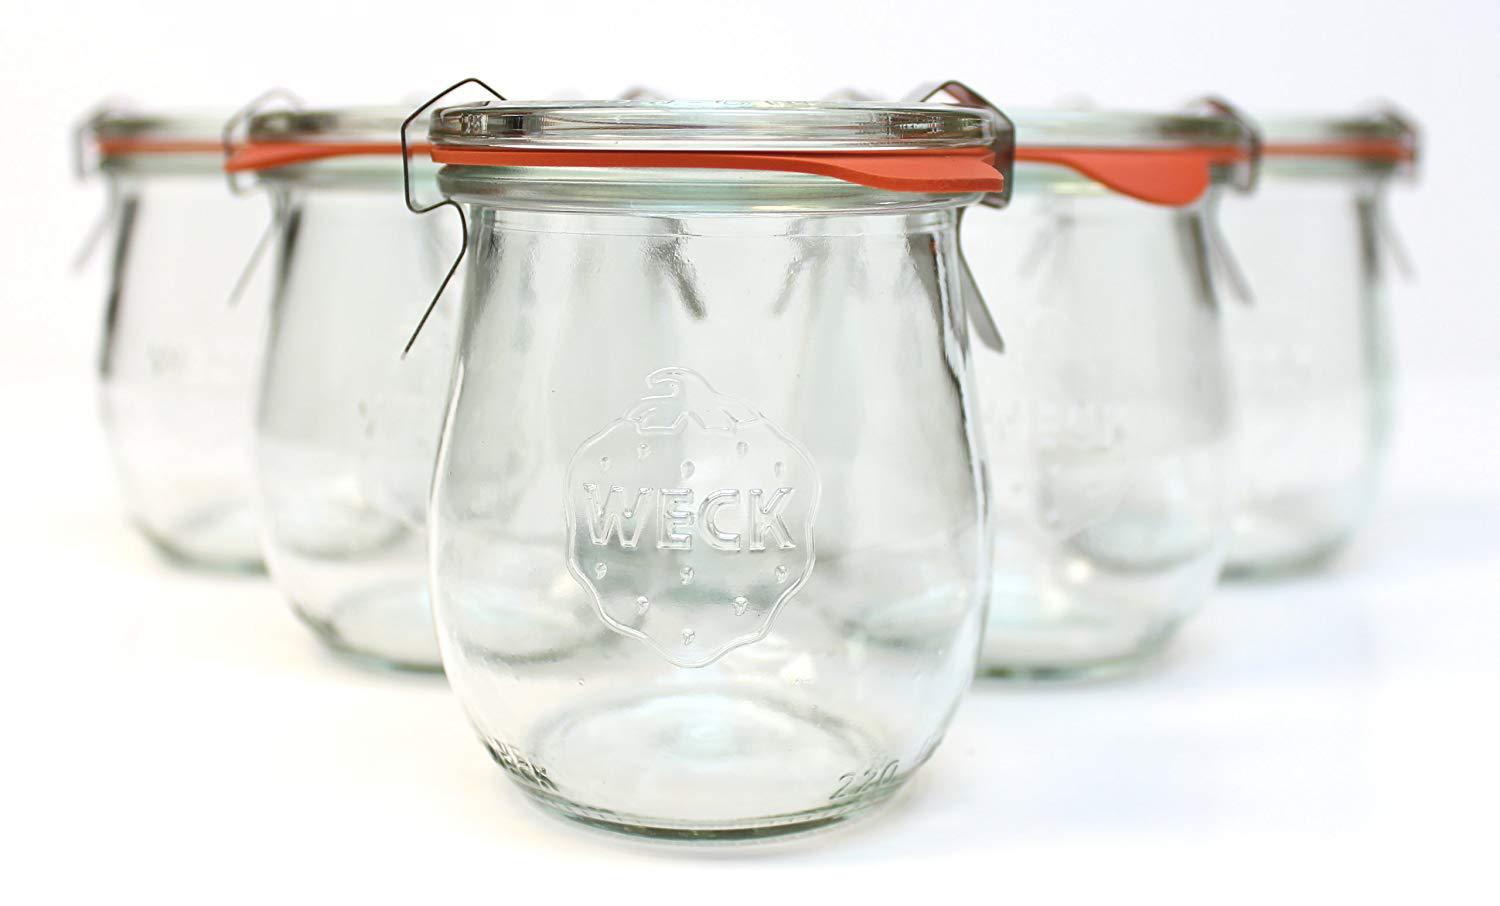 Stock photo of a set of Weck canning/serving jars.